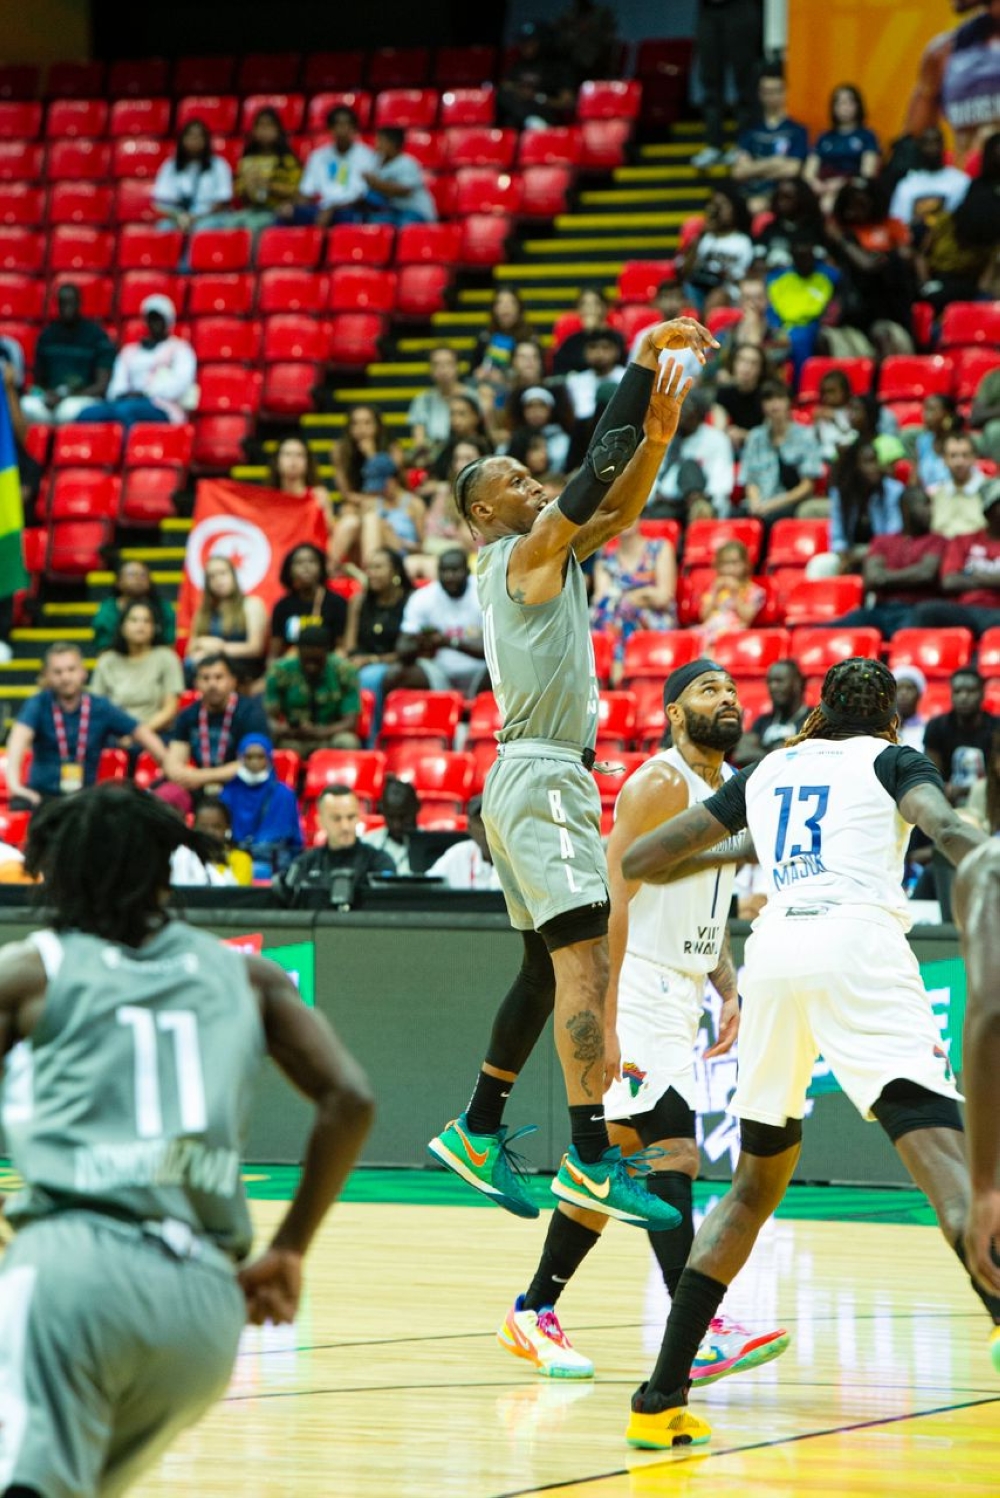 Rwandan-American point guard Adonis Filer in action during the game